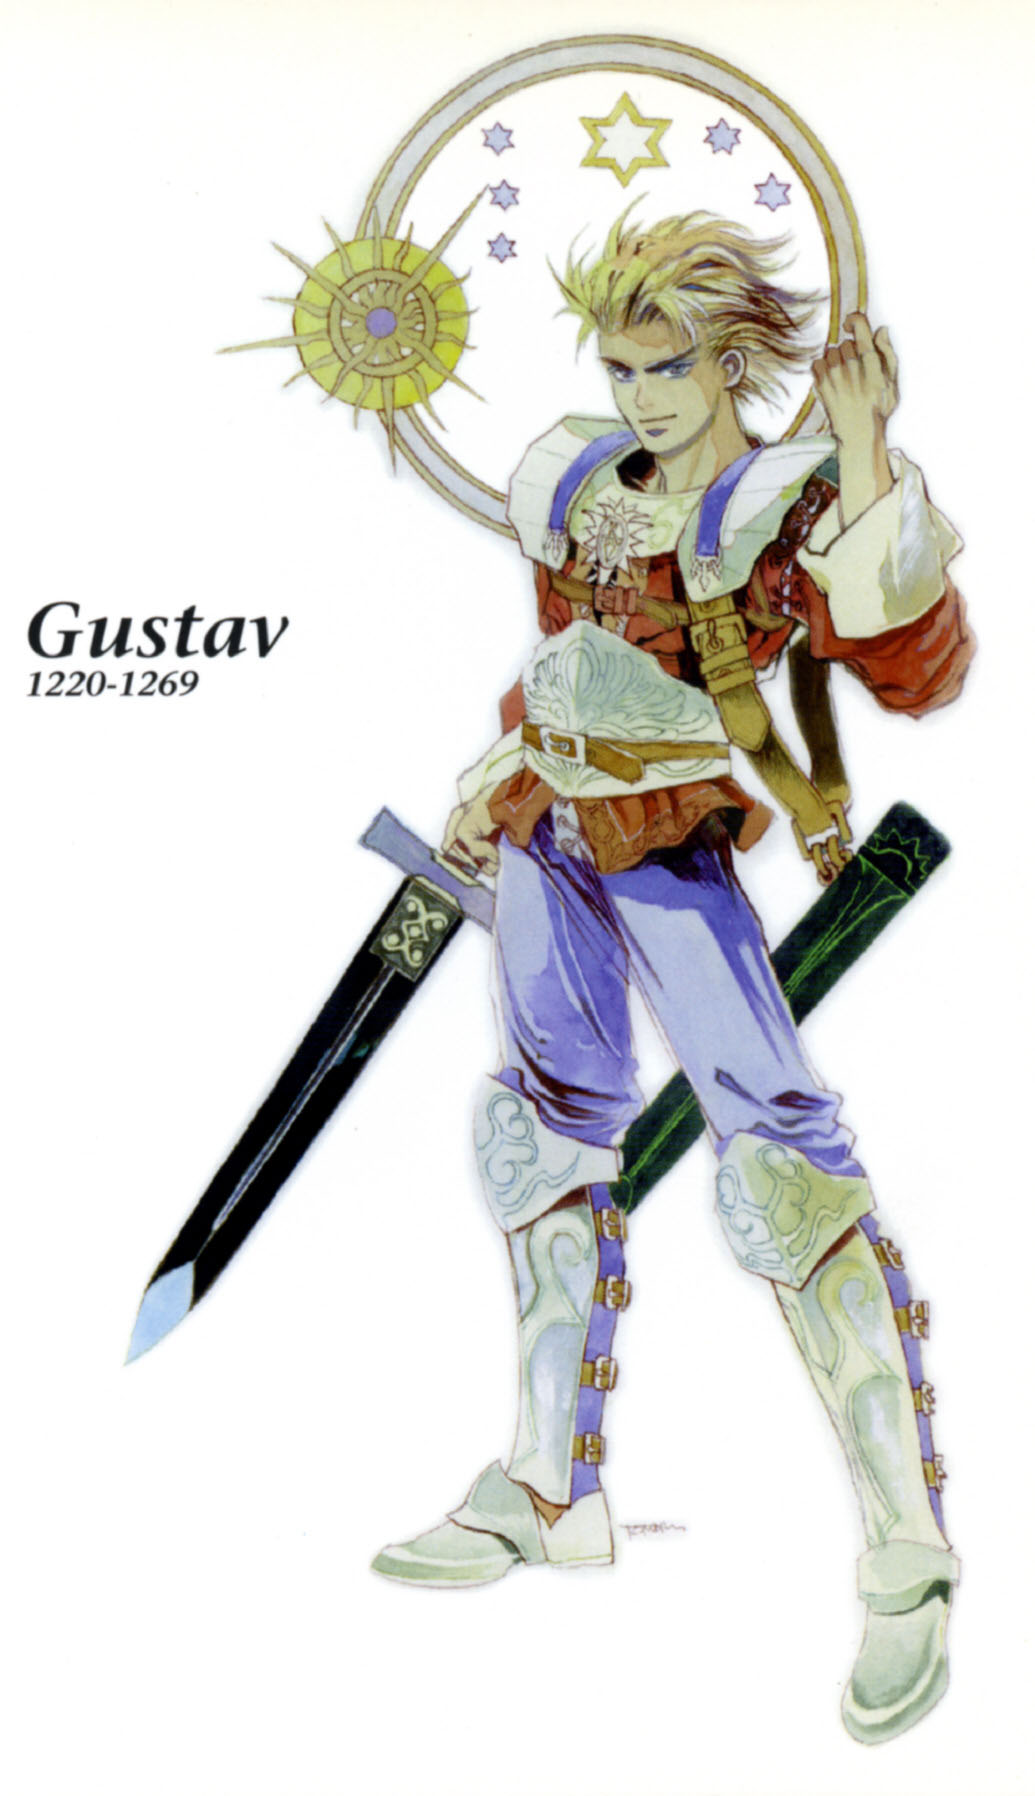 gustave the steel